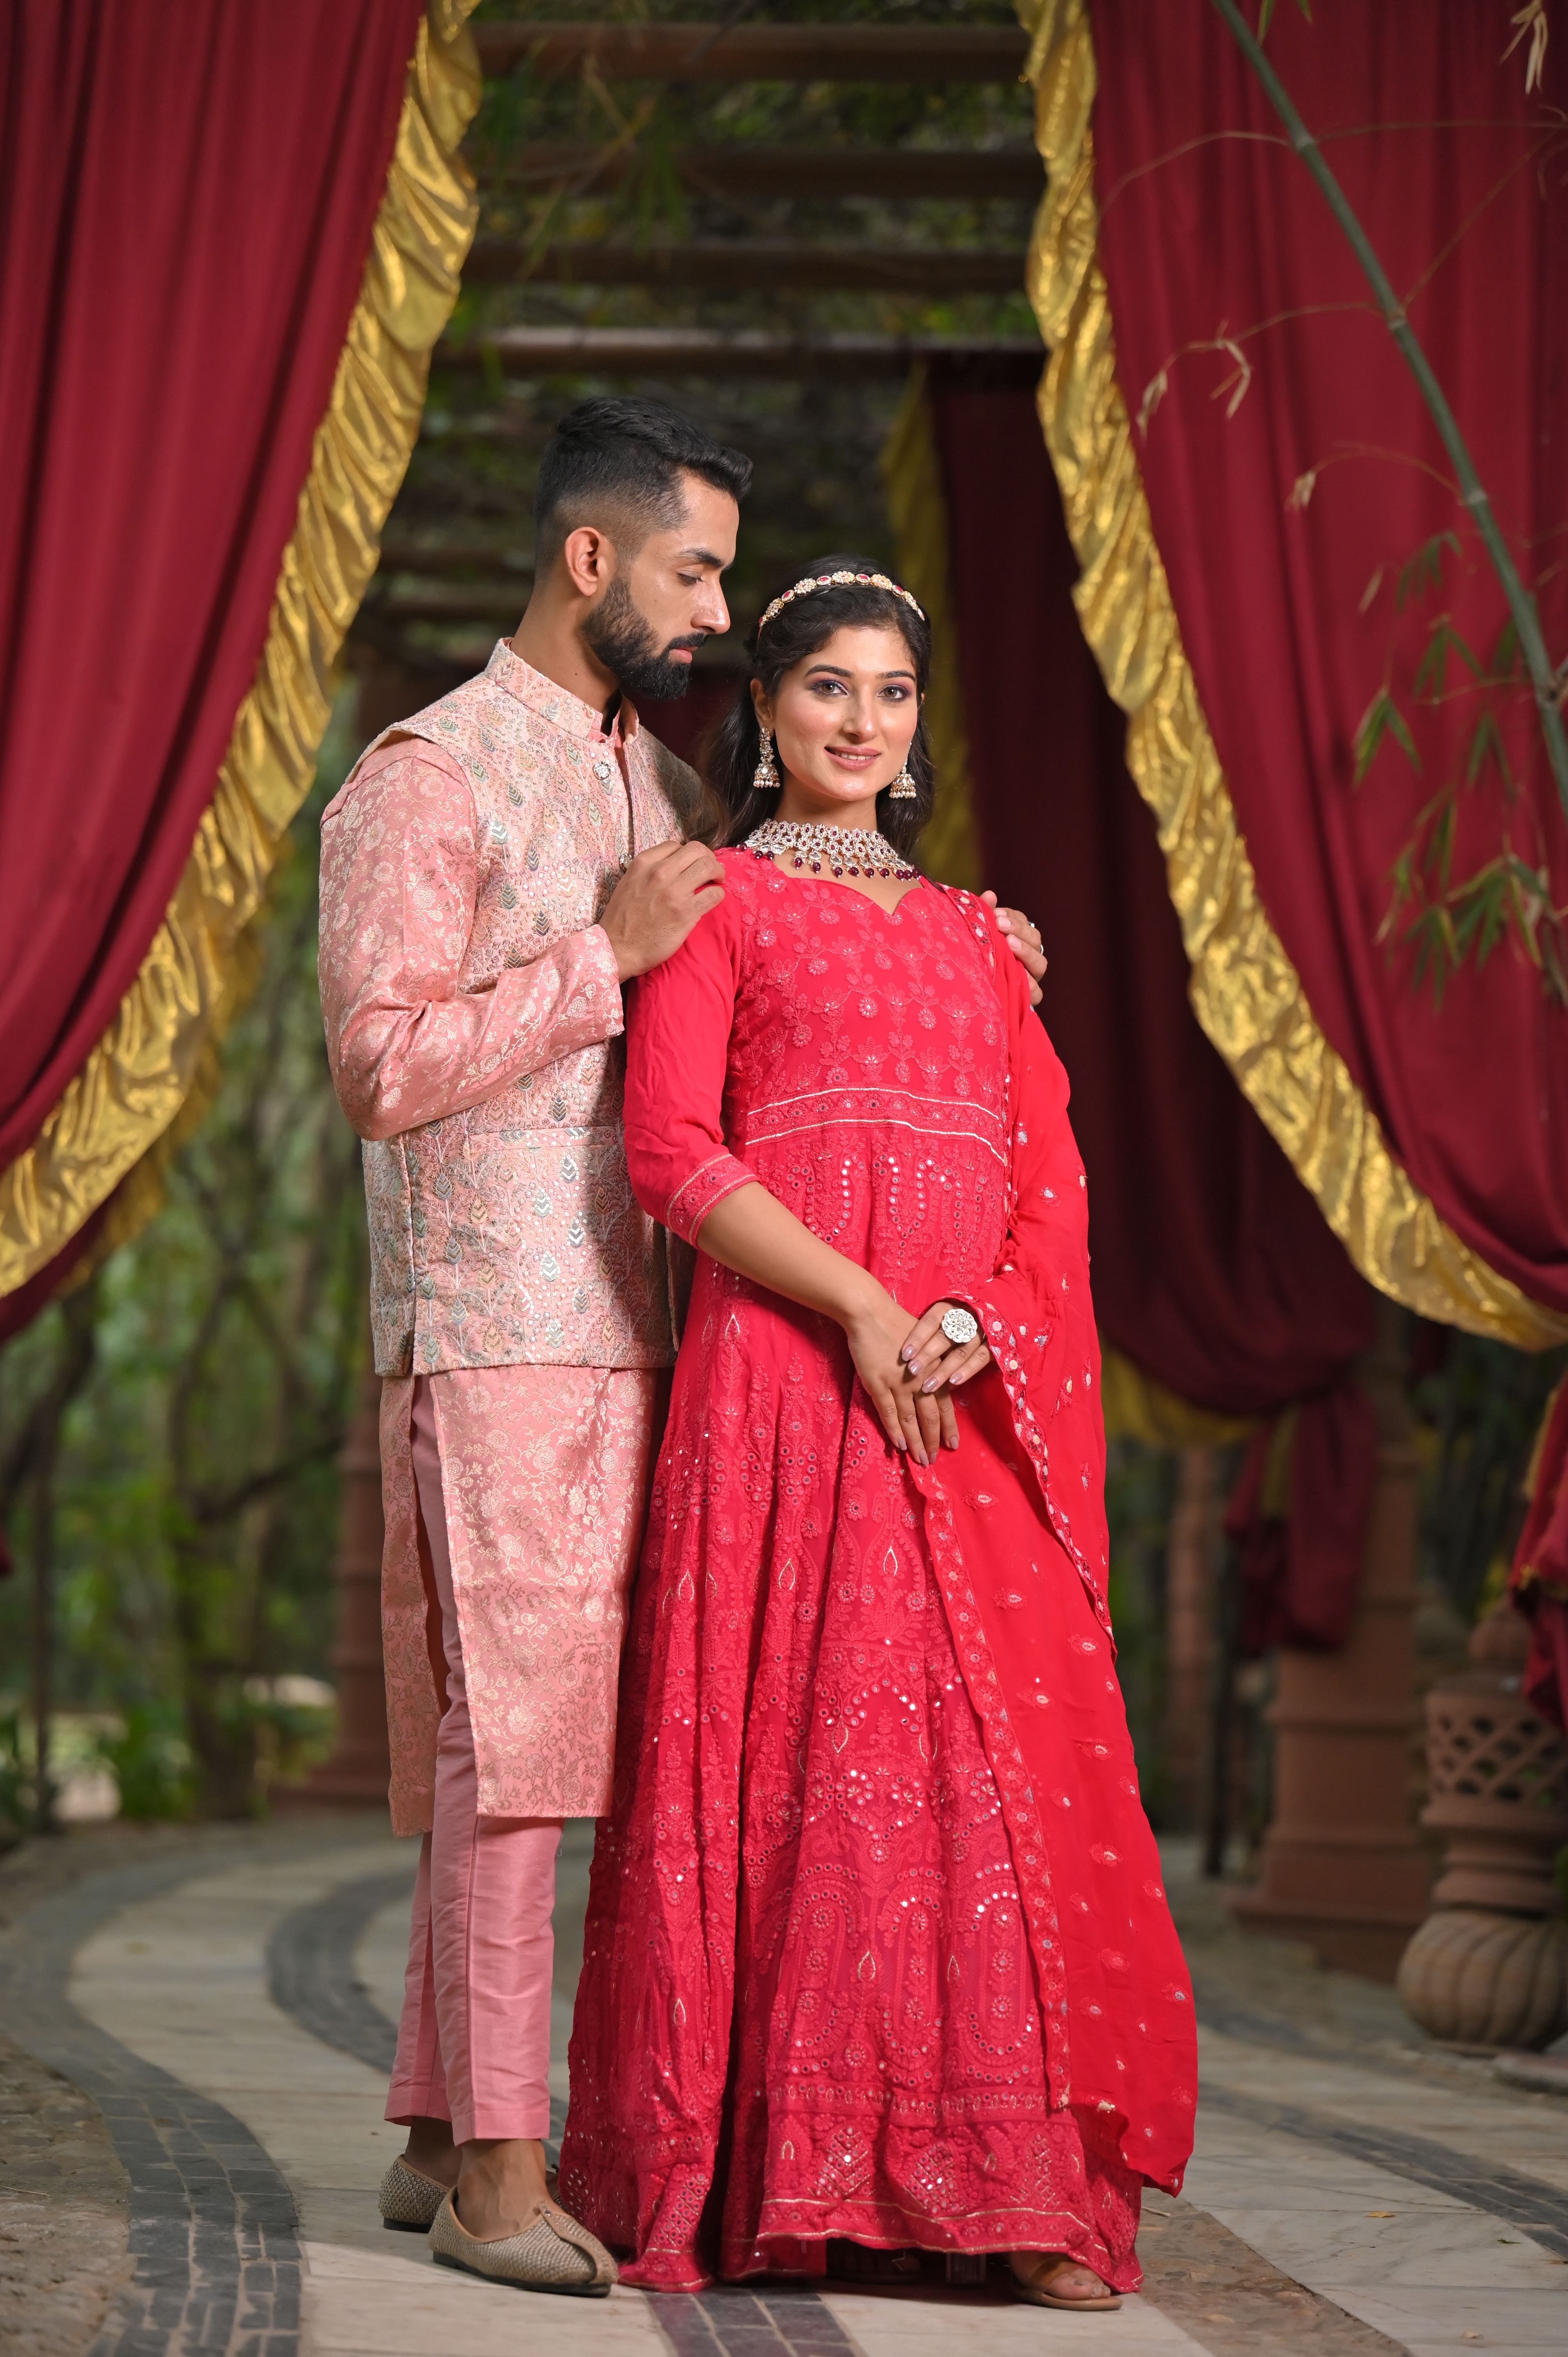 20+ Ravishing Engagement Gowns For Brides That Will Leave You Stunned | Engagement  gowns, Indian wedding gowns, Reception gown for bride